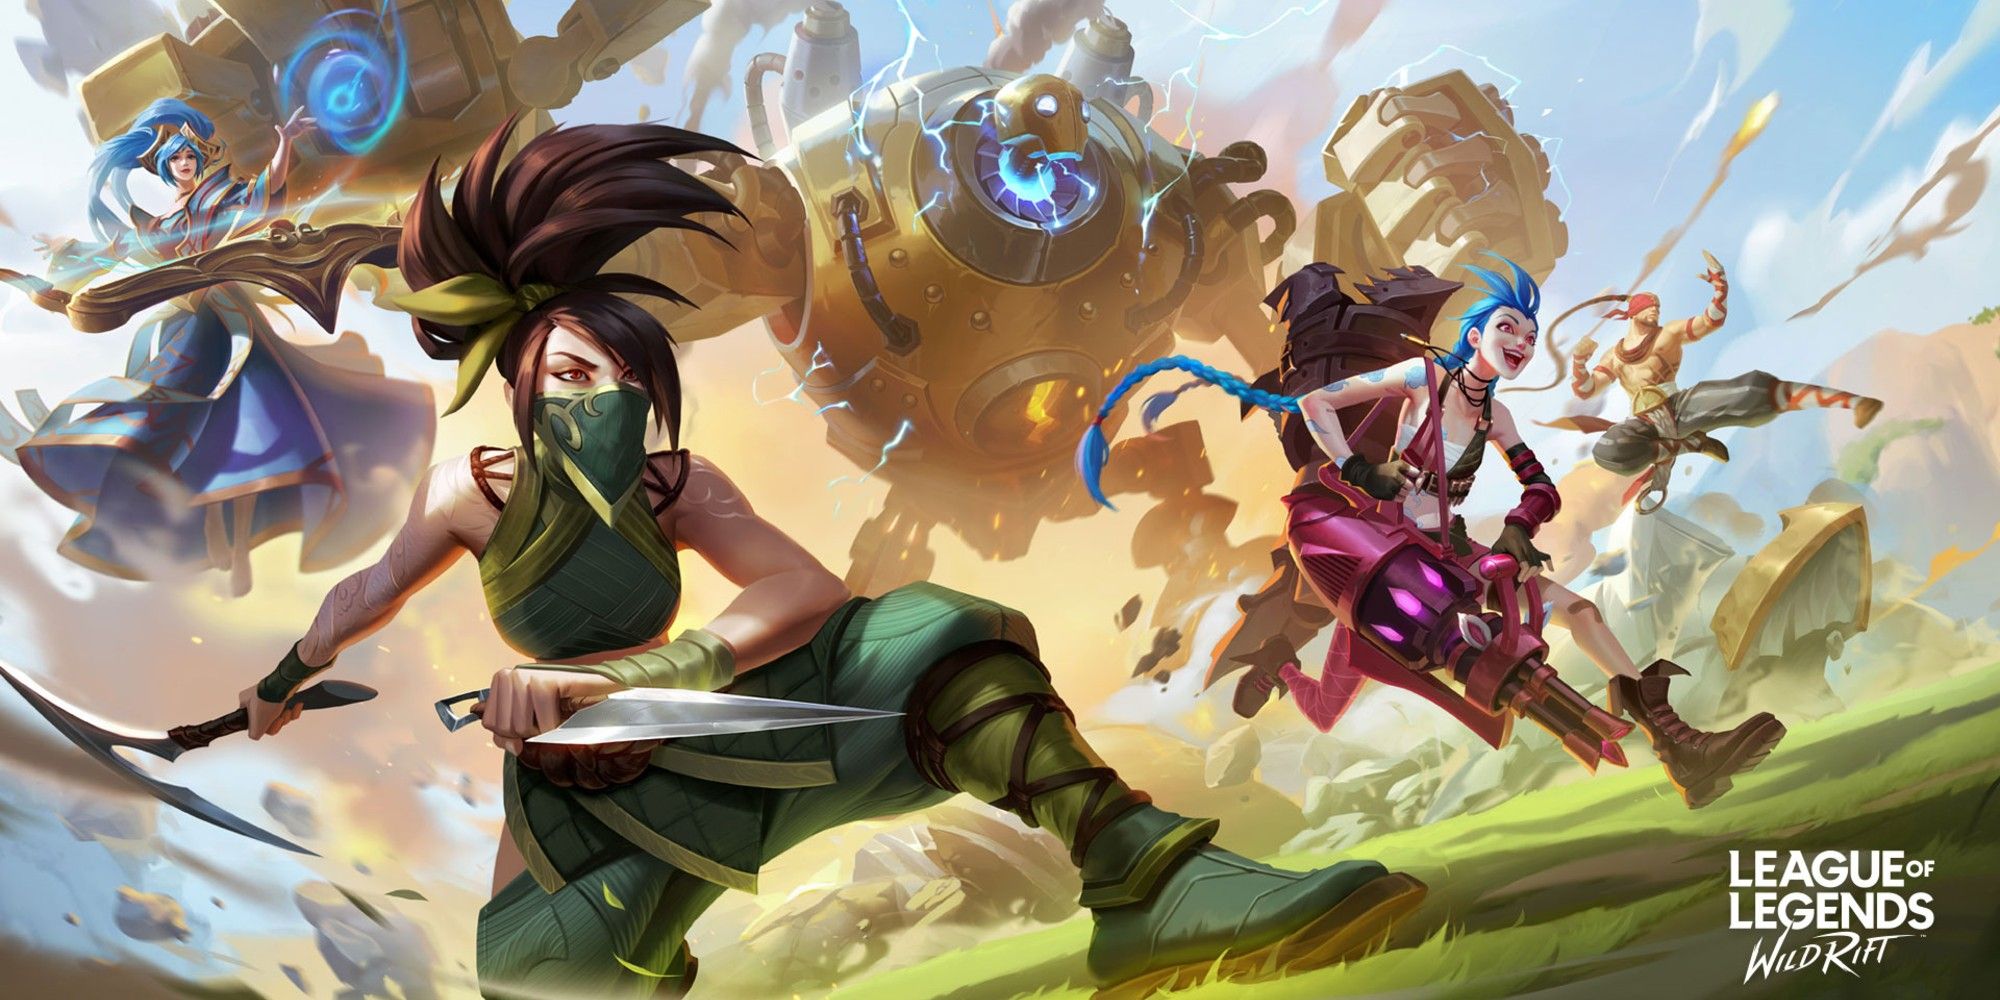 Champion characters enter the battle arena and fight enemy champions in League of Legends: Wild Rift